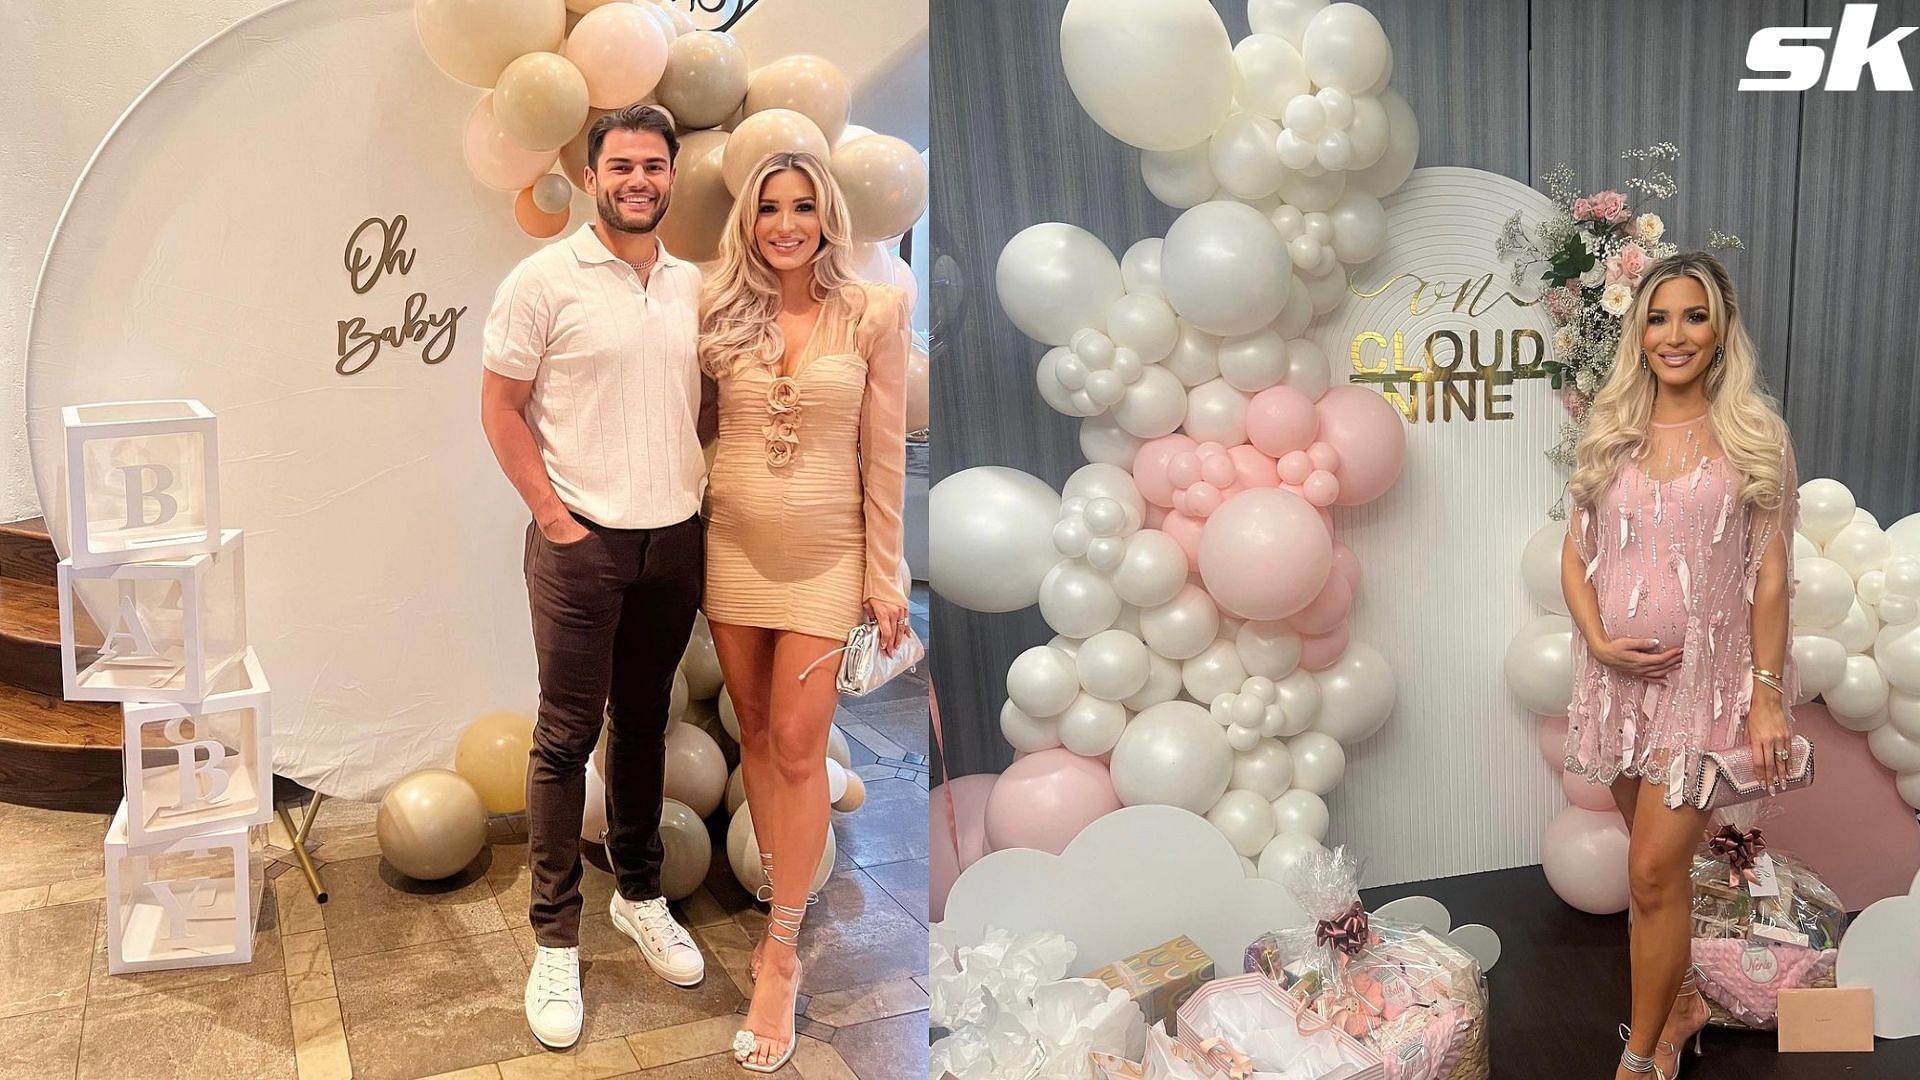 Astros pitcher Lance McCullers Jr., wife welcome baby girl